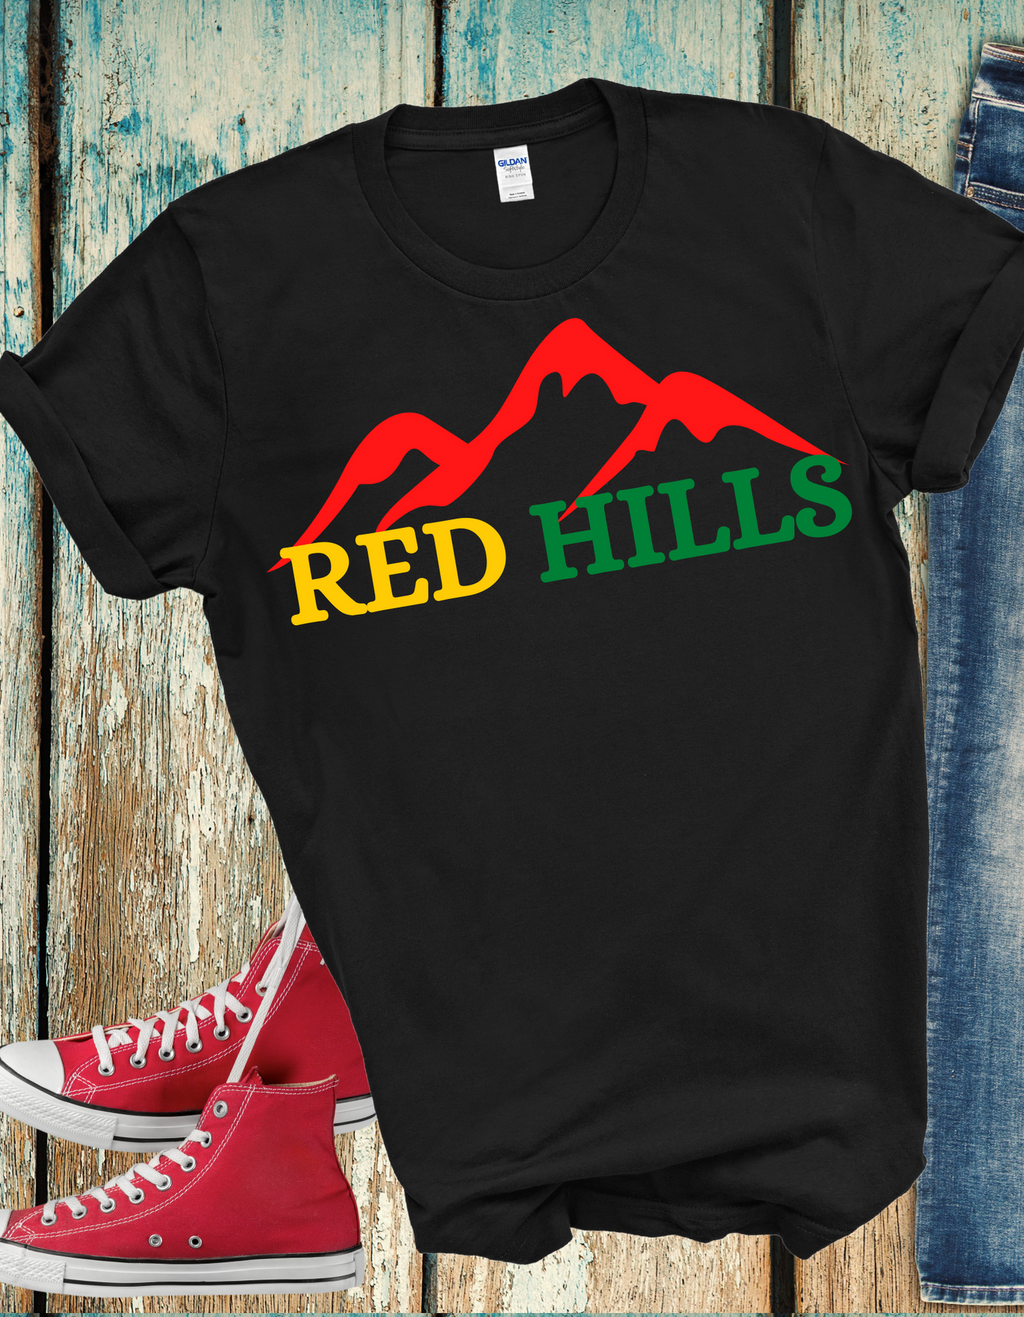 Red Hills tees.